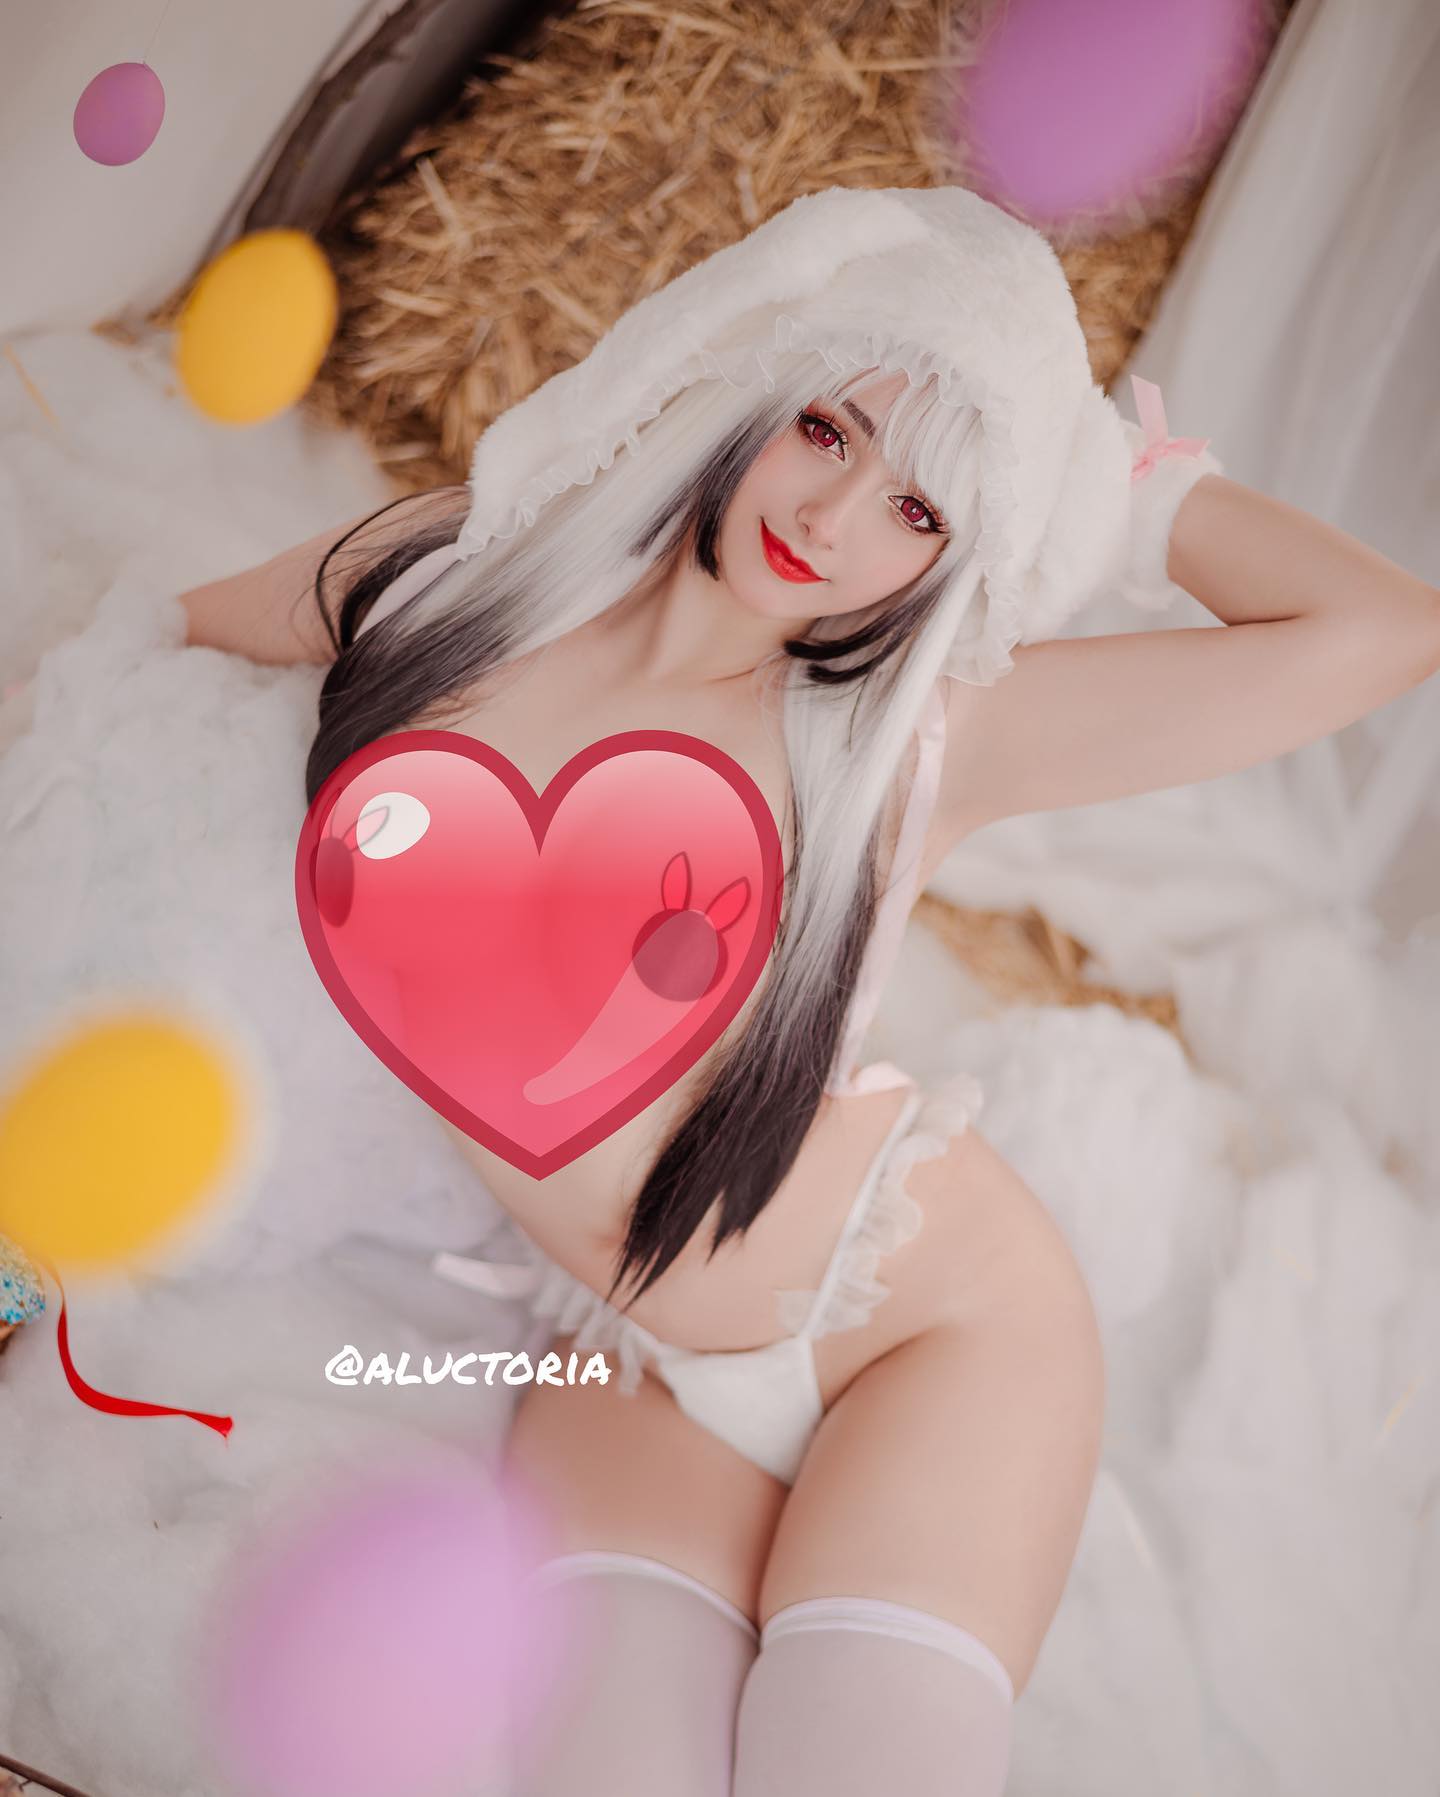 😘what is your fav candy?😘

♡📸 @hollywhite.photo

♡ Model: @aluctoria

#easter ter #bunny #bunnygirl